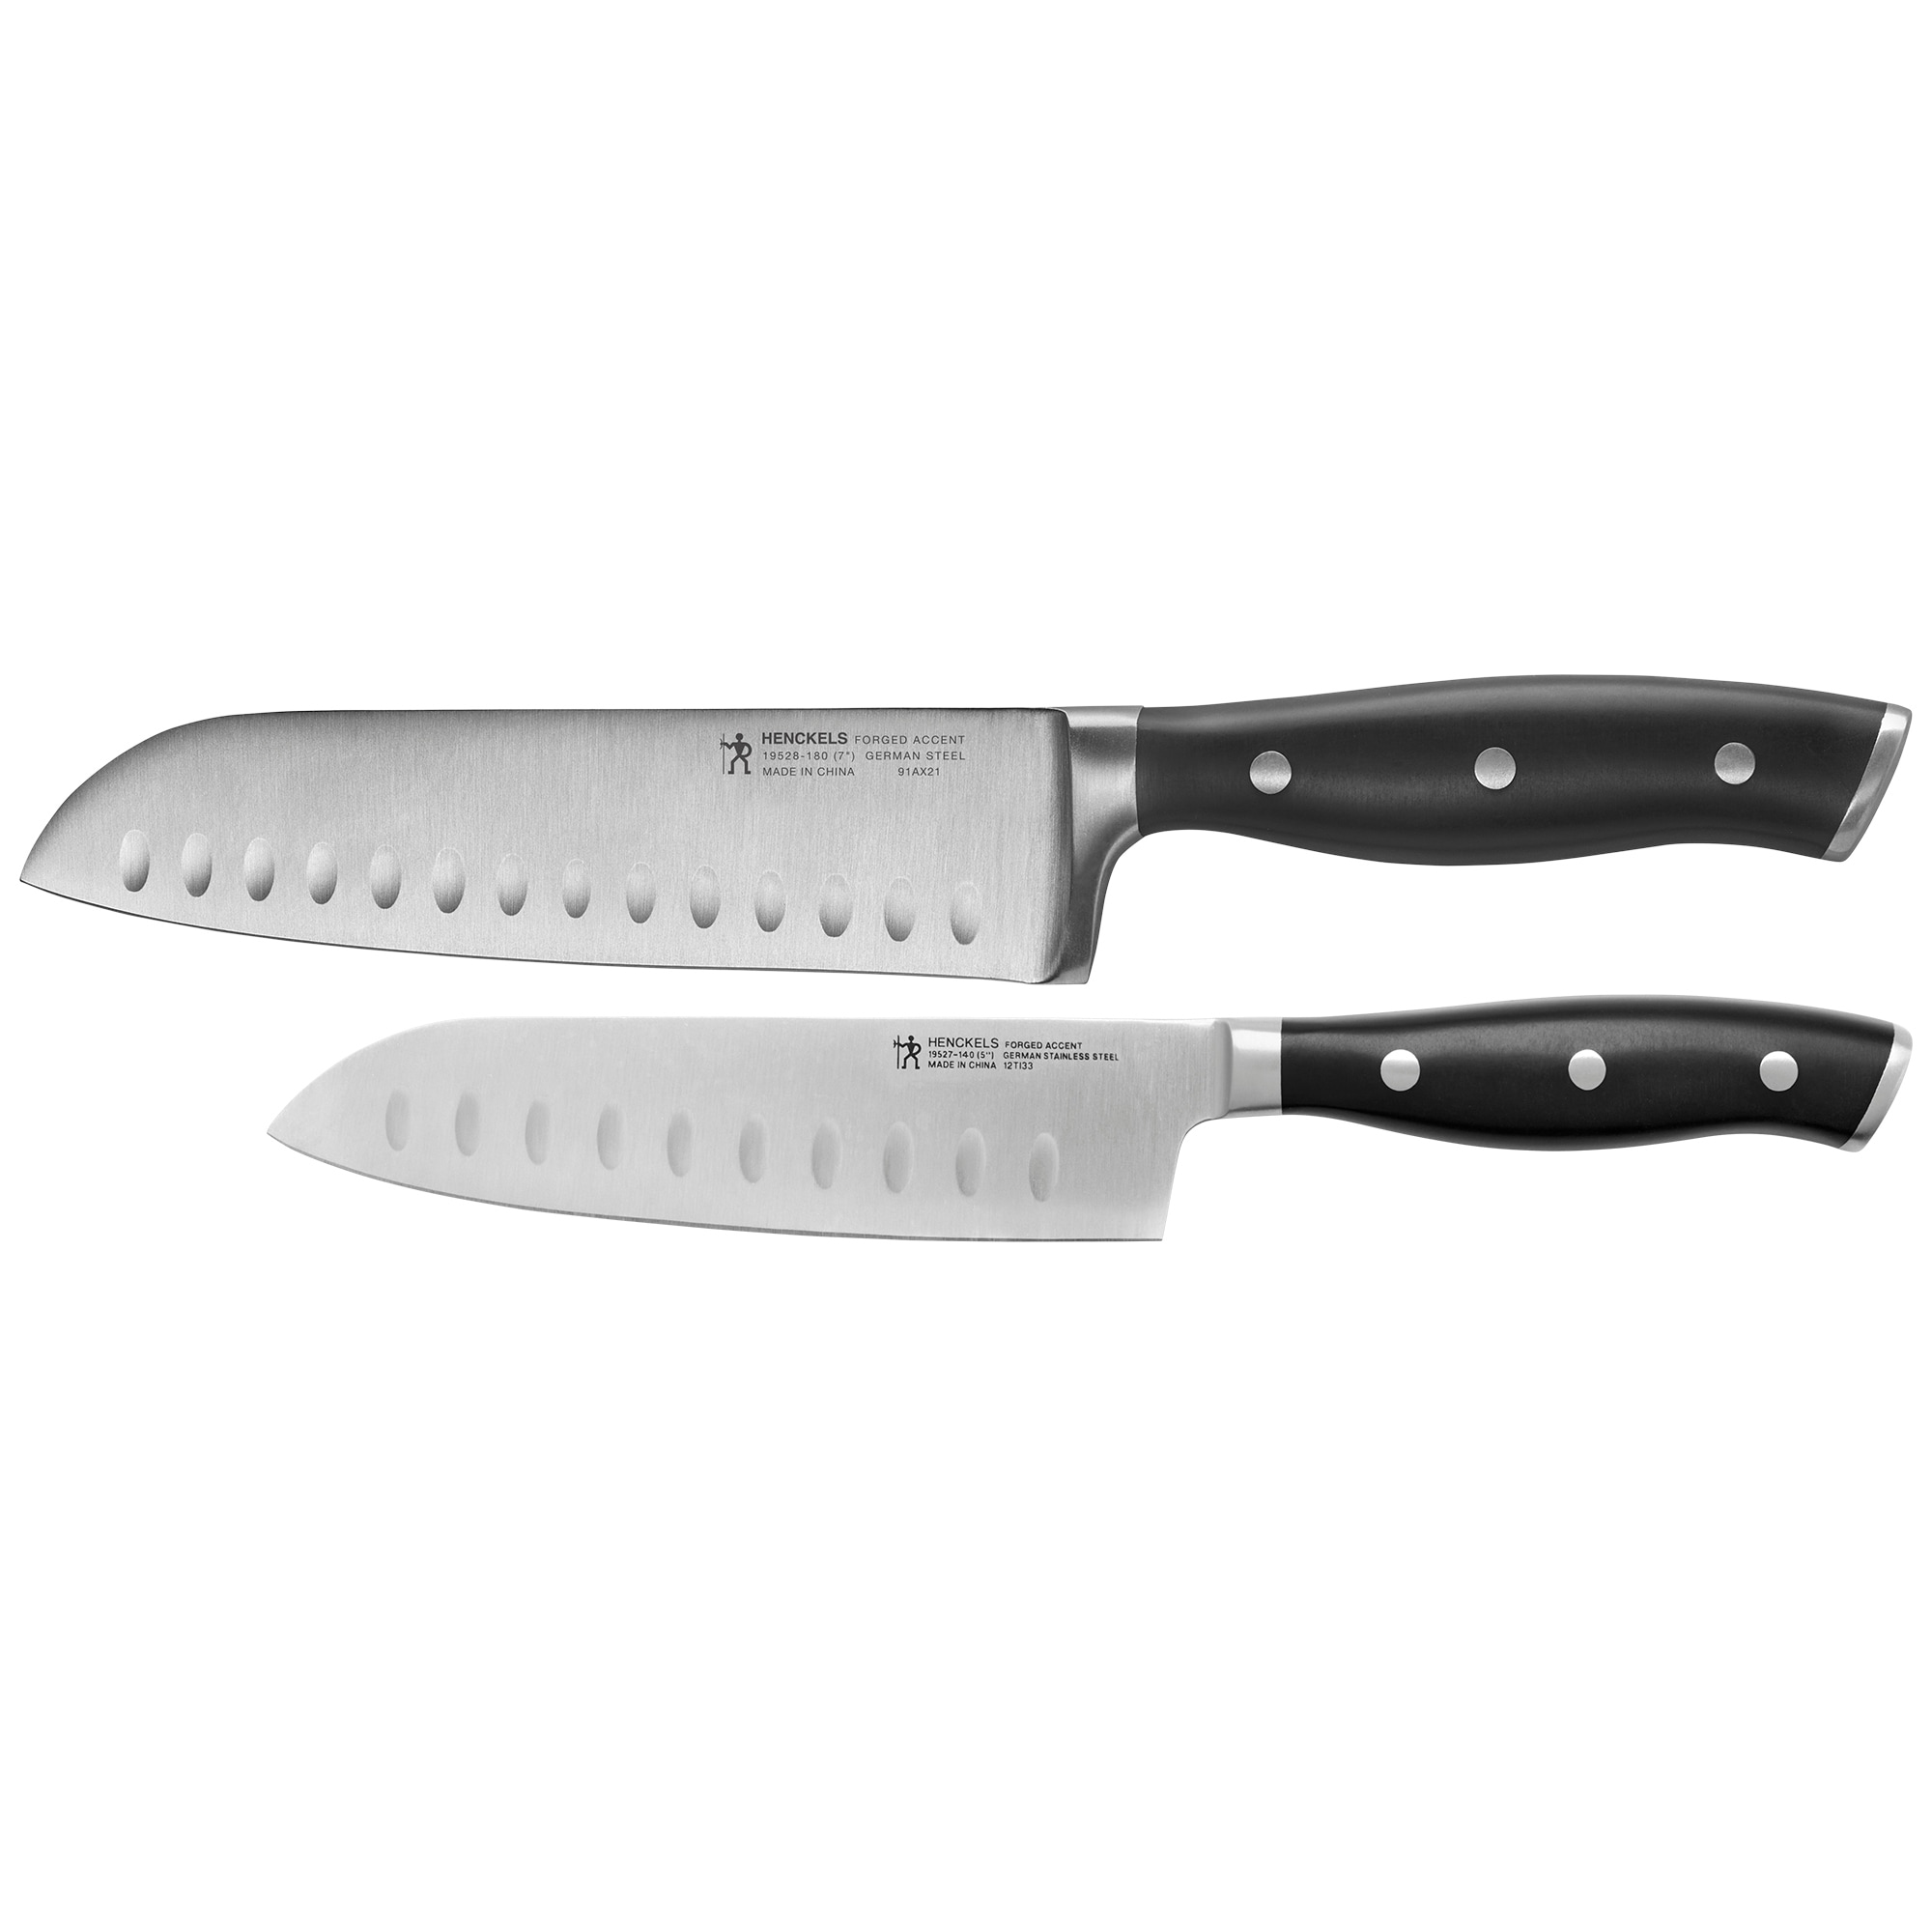 https://ak1.ostkcdn.com/images/products/is/images/direct/16da6501bad9655136c2d2283924442f8be145c5/Henckels-Forged-Accent-2-pc-Asian-Knife-Set.jpg